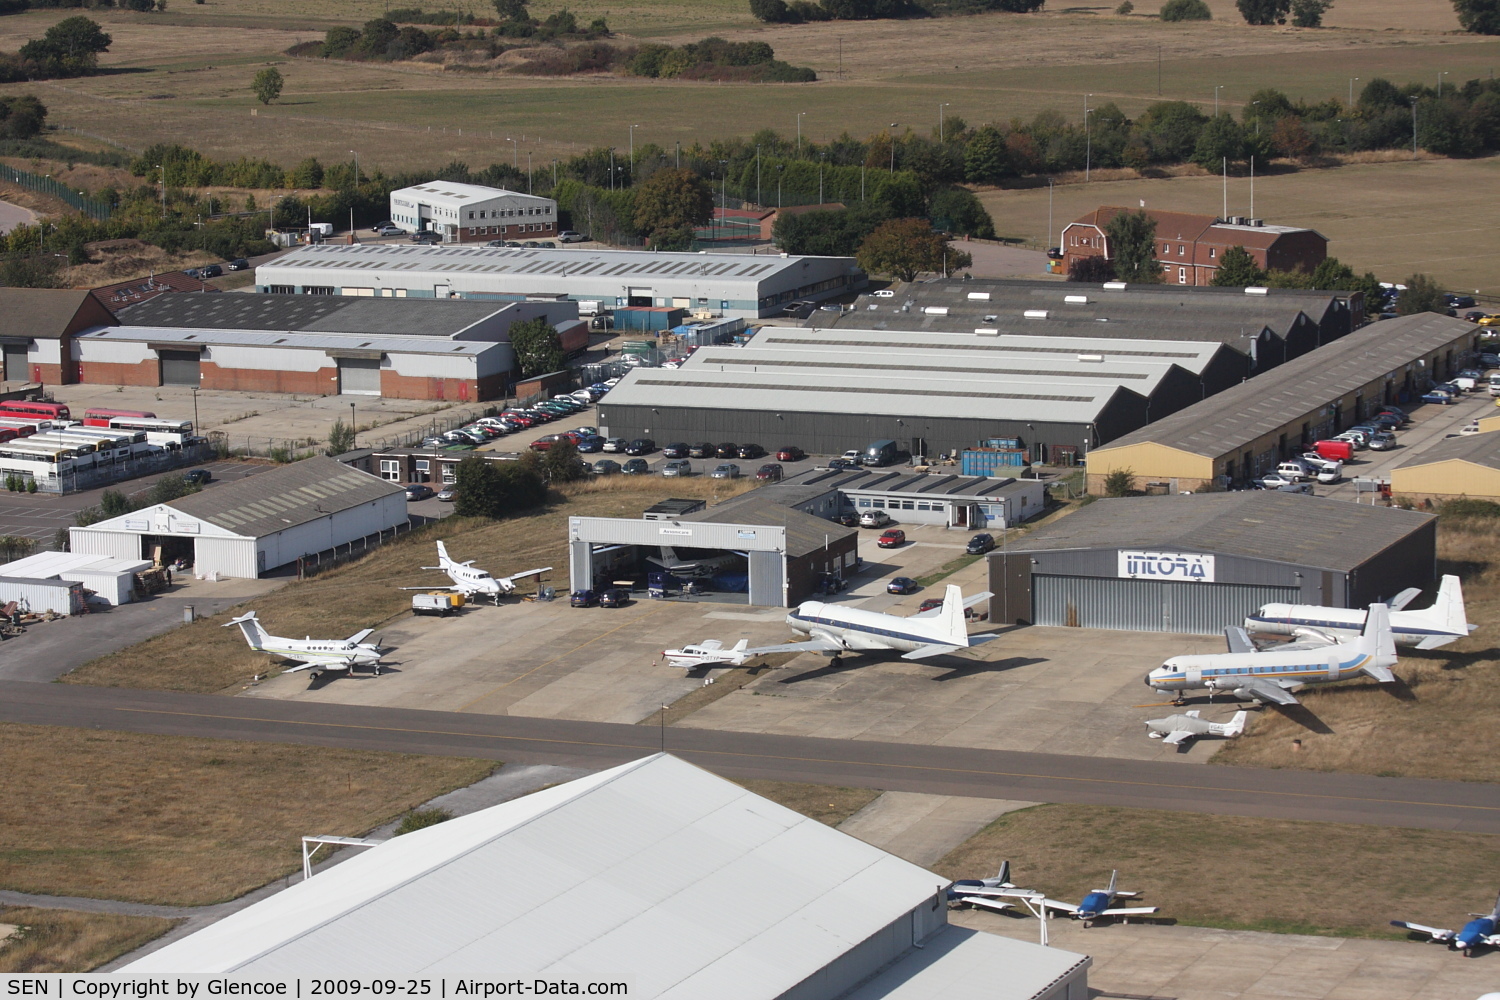 London Southend Airport, Southend-on-Sea, England United Kingdom (SEN) - Some Aircraft Stored